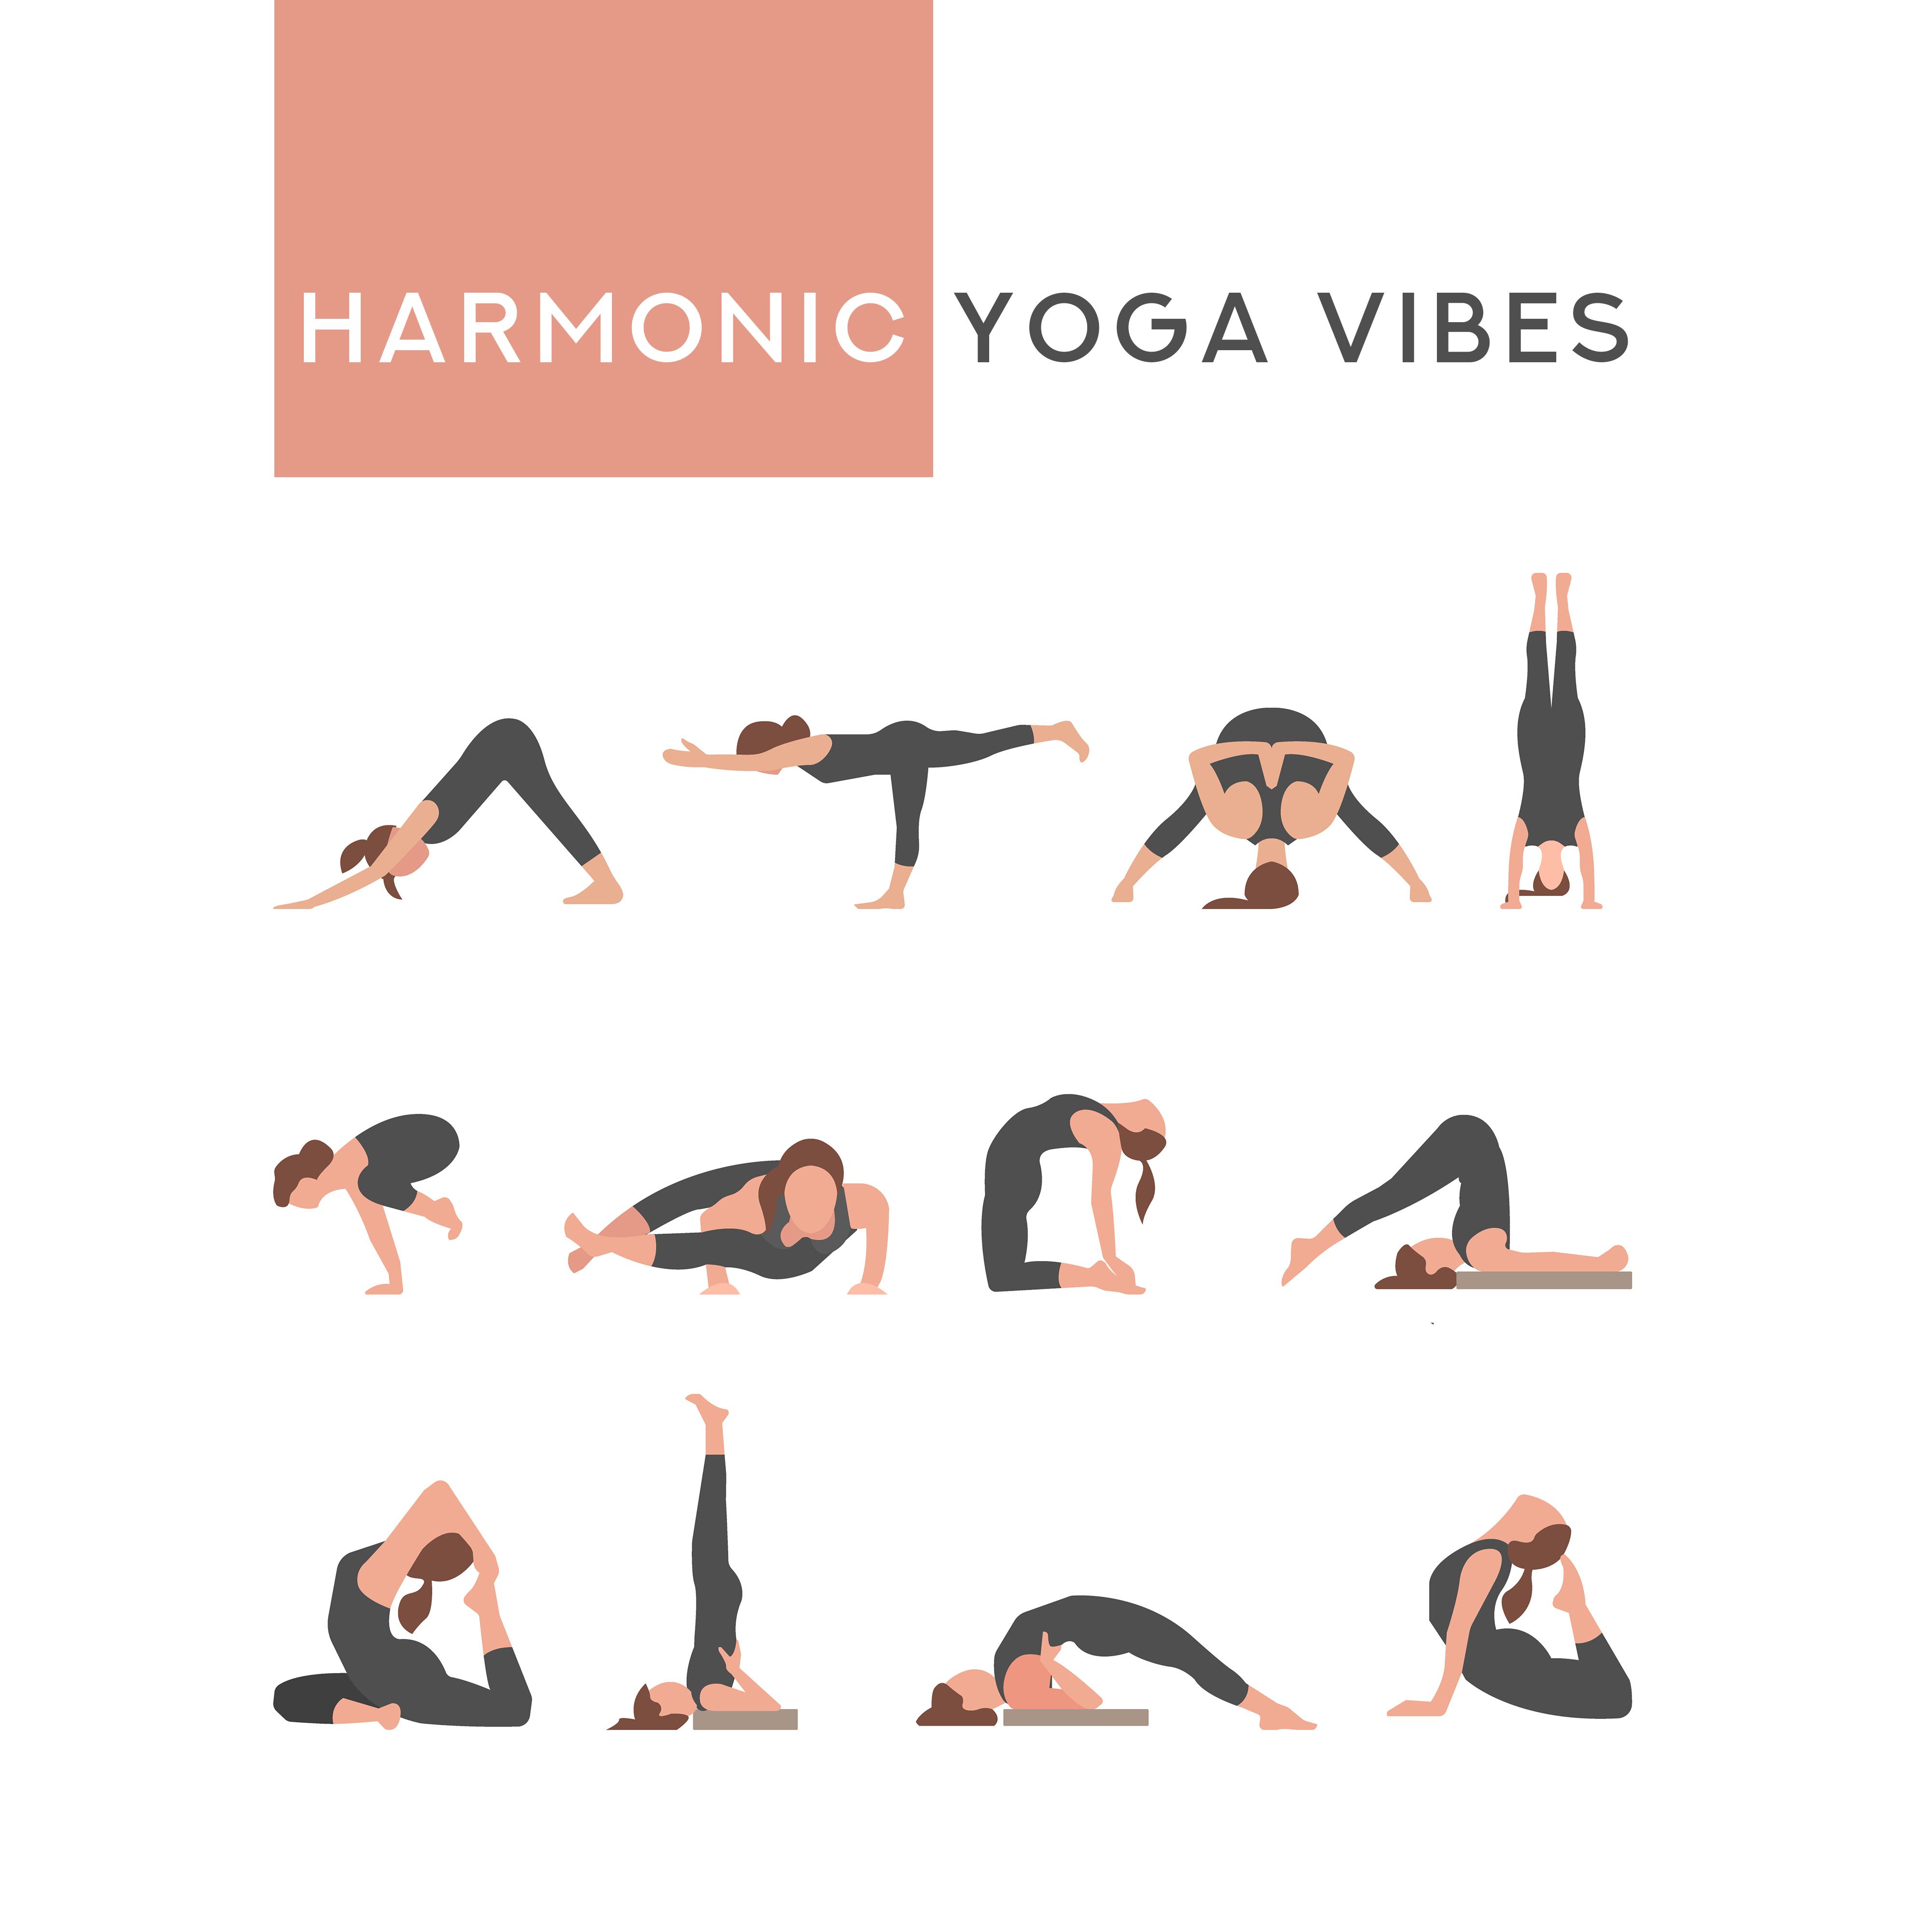 Harmonic Yoga Vibes: 15 Ambient Track for Meditation, Top 2019 Music for Deep Relaxation & Zen Yoga Training